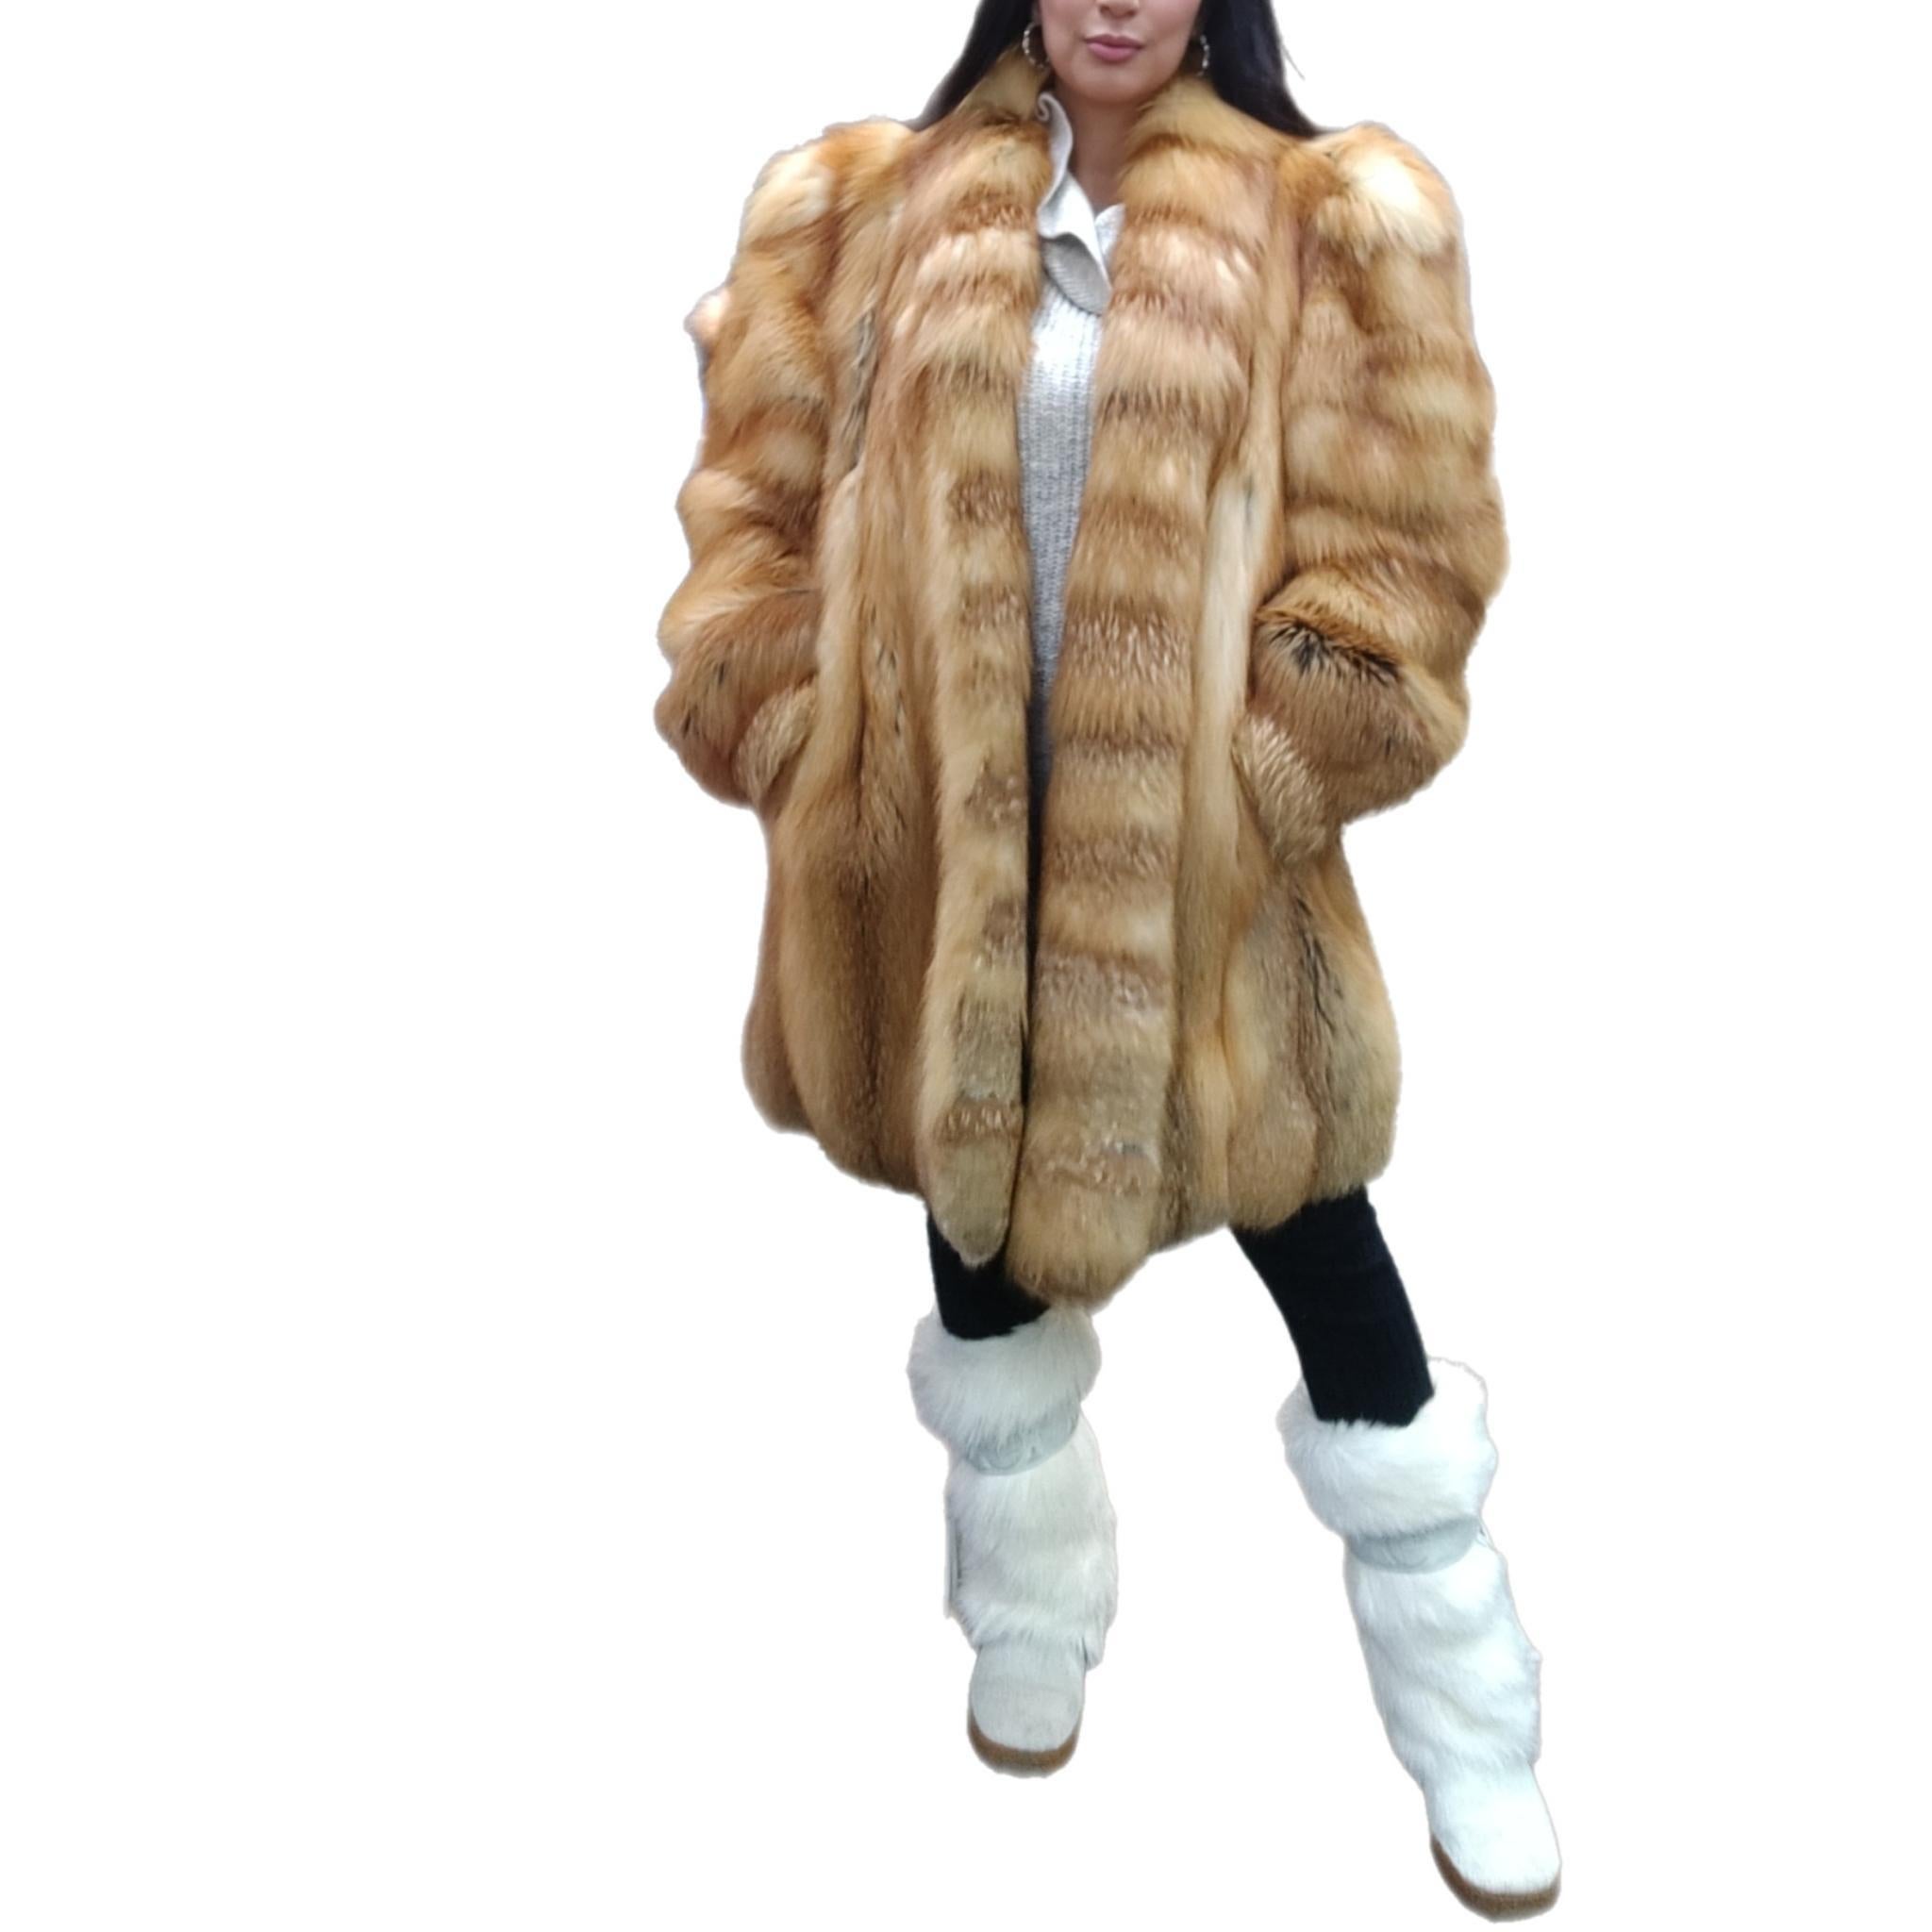 ~Unused Red fox Fur Coat (Size 12-14 - L) 

When it comes to fur, Canada Majestic is the ultimate reference in quality and style. This stunning red fox coat is a classic with the tuxedo design and fox trim classic borders. It has a fluffy trim and a